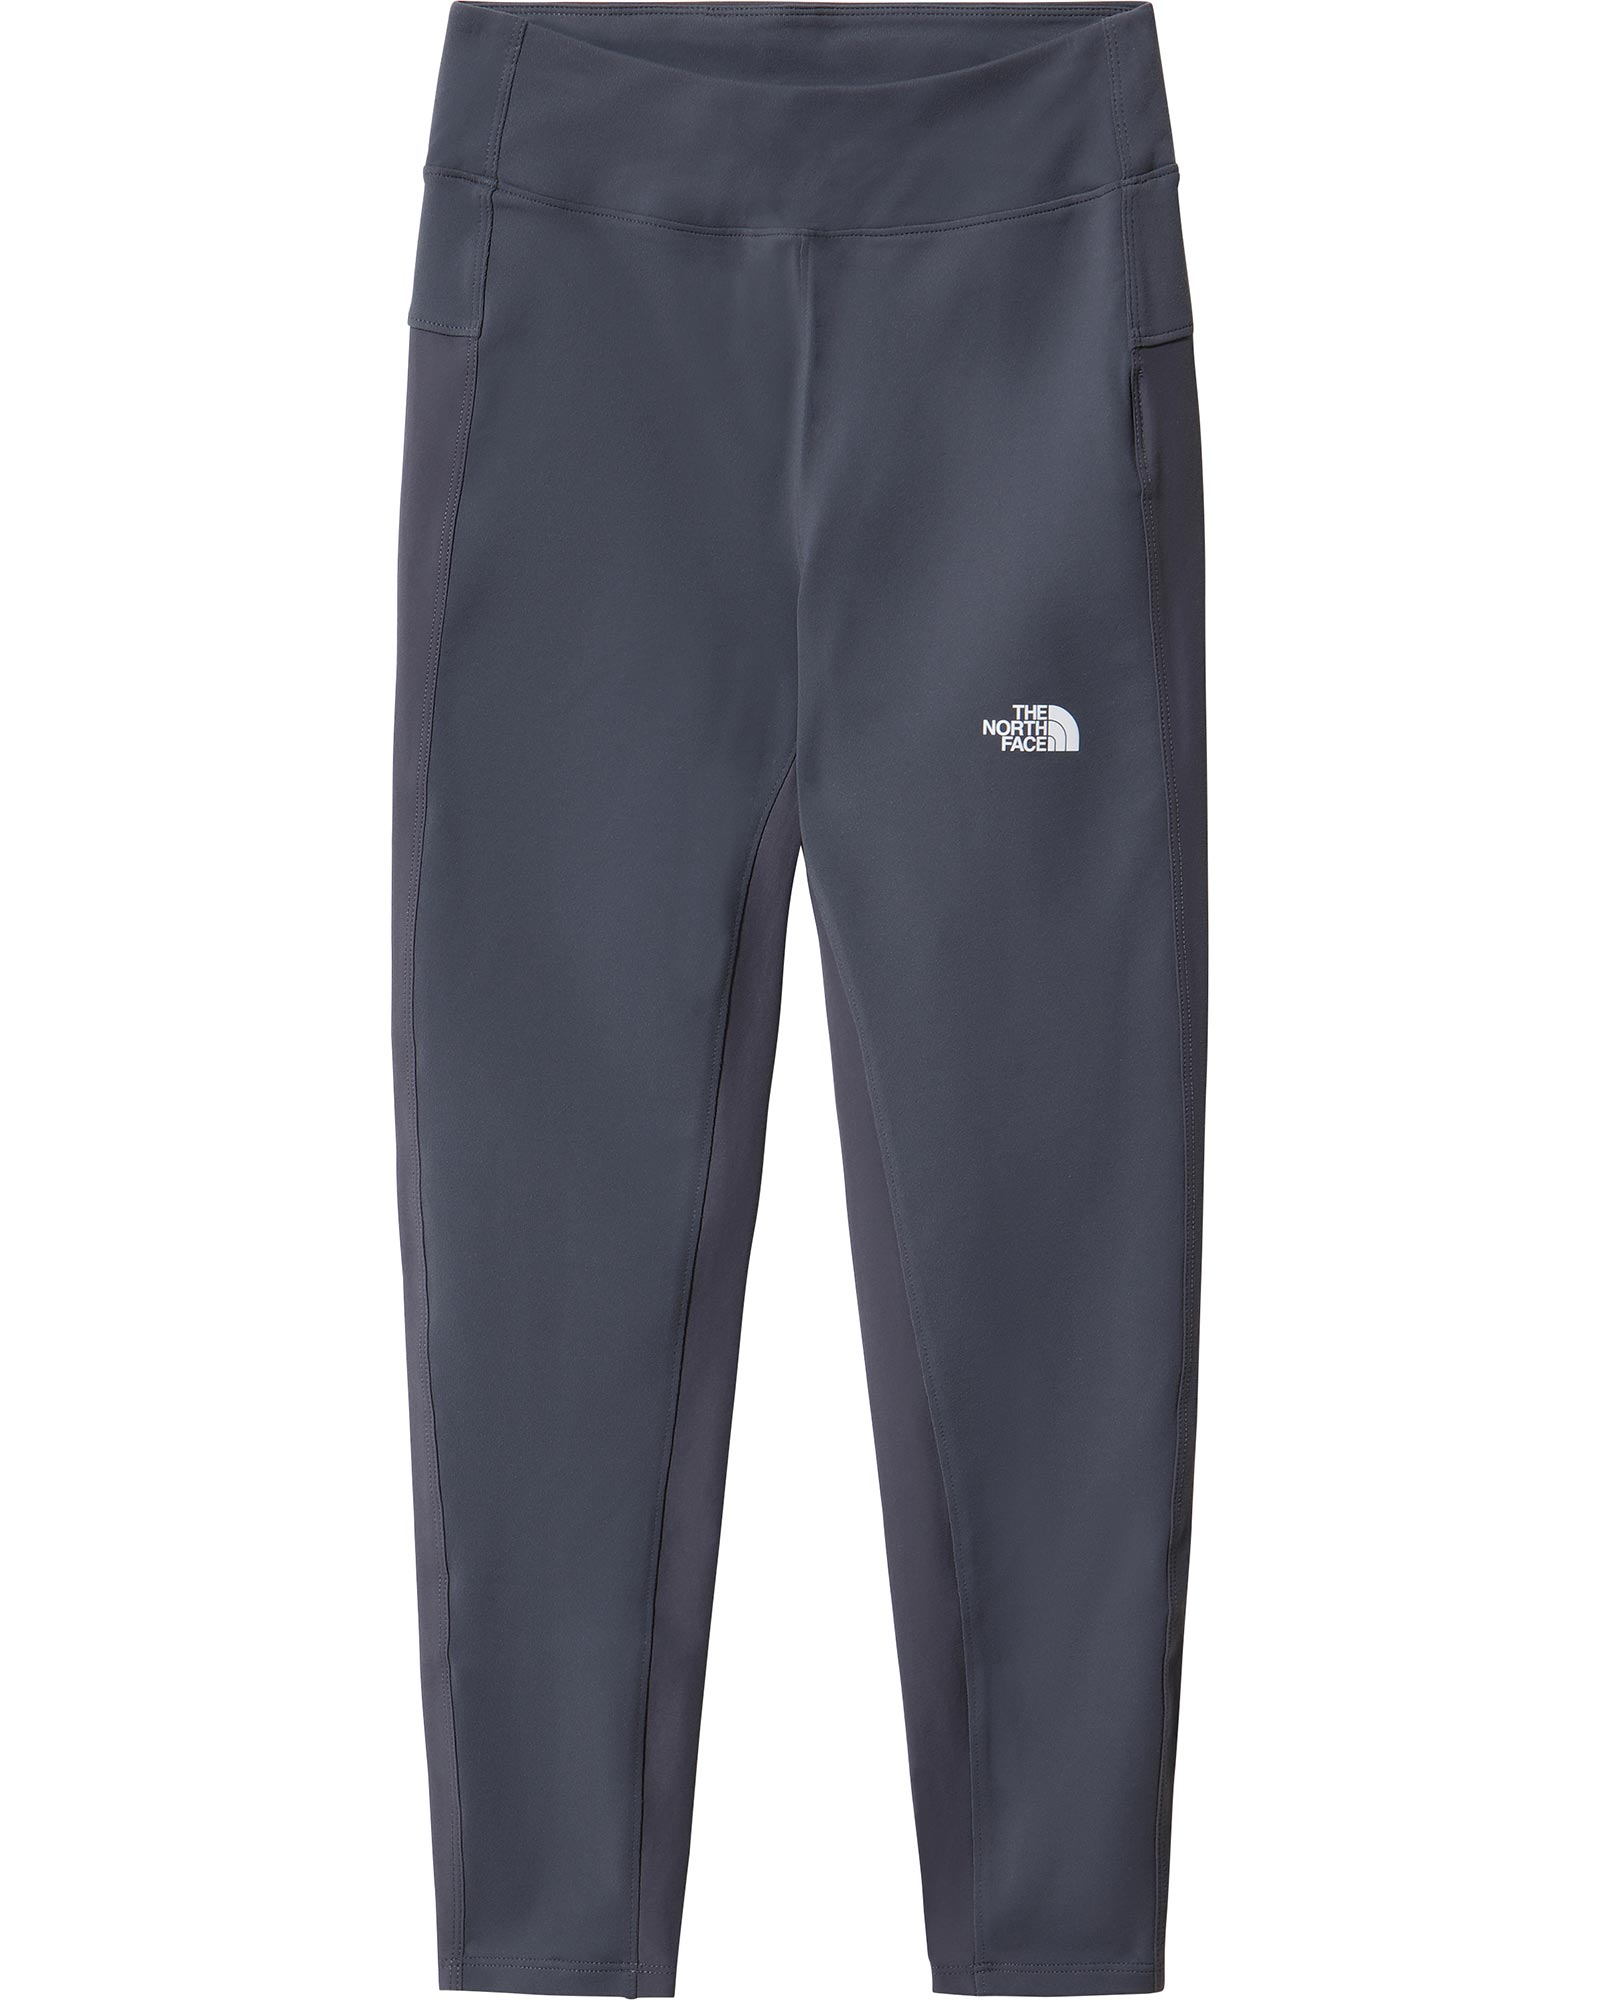 The North Face Girl's Exploration Leggings